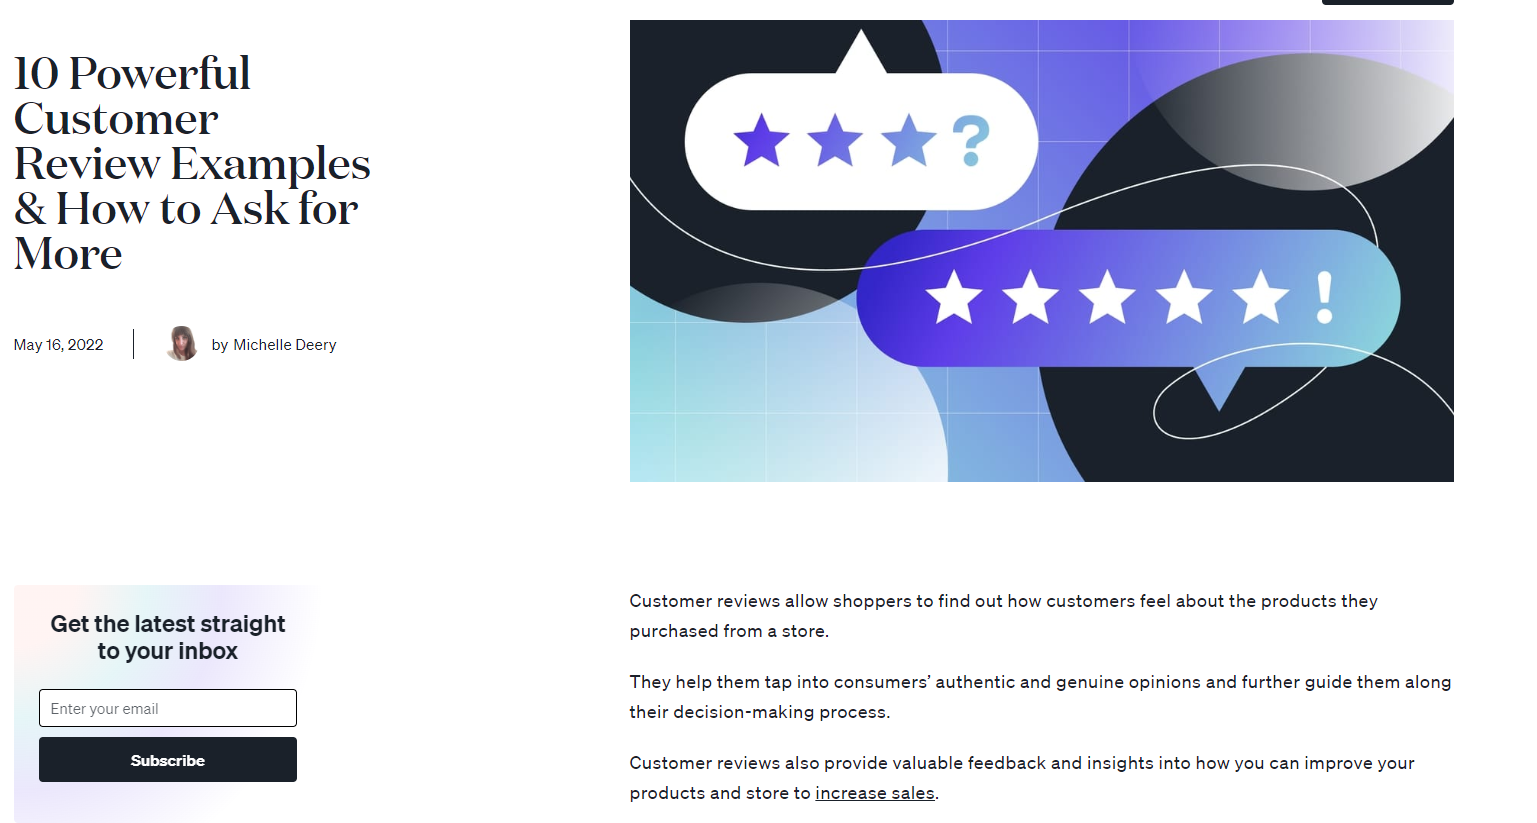 10 Powerful Customer Review Examples & How to Ask for More